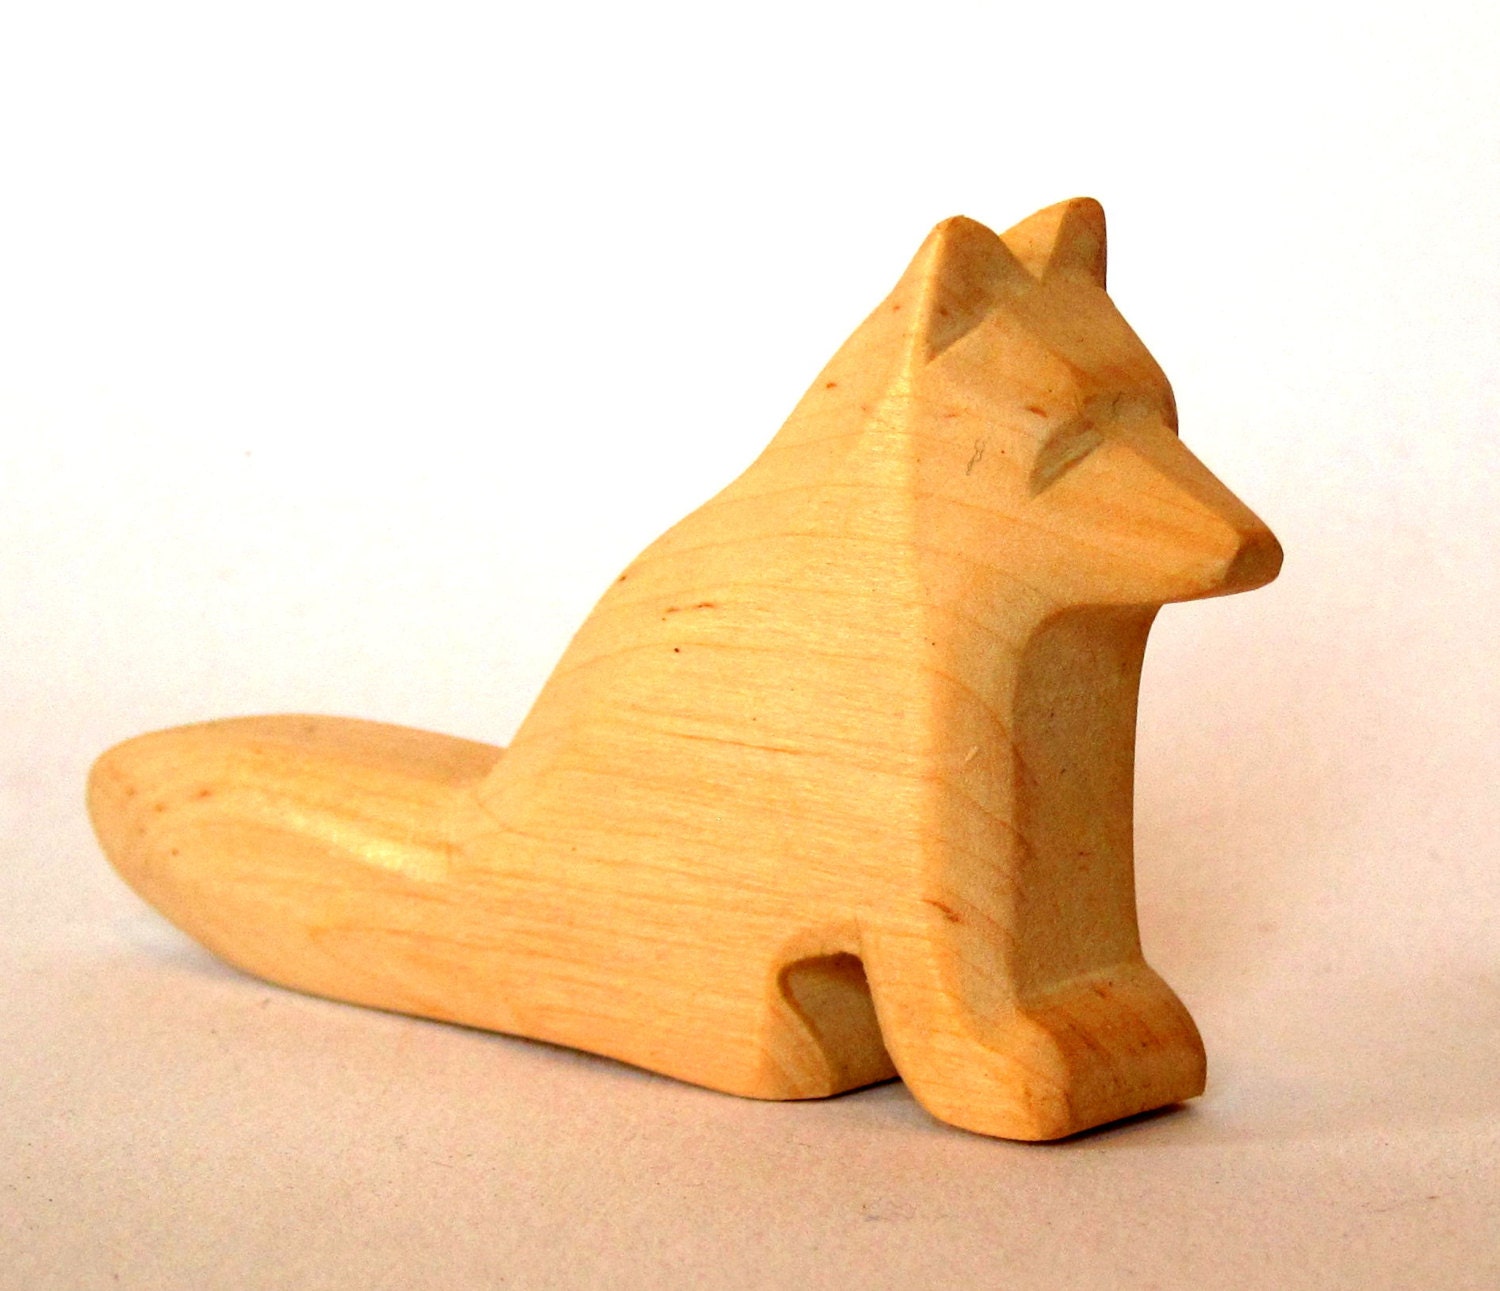 How to Whittle a Simple Fox - Step By Step Beginner Wood Carving Project 